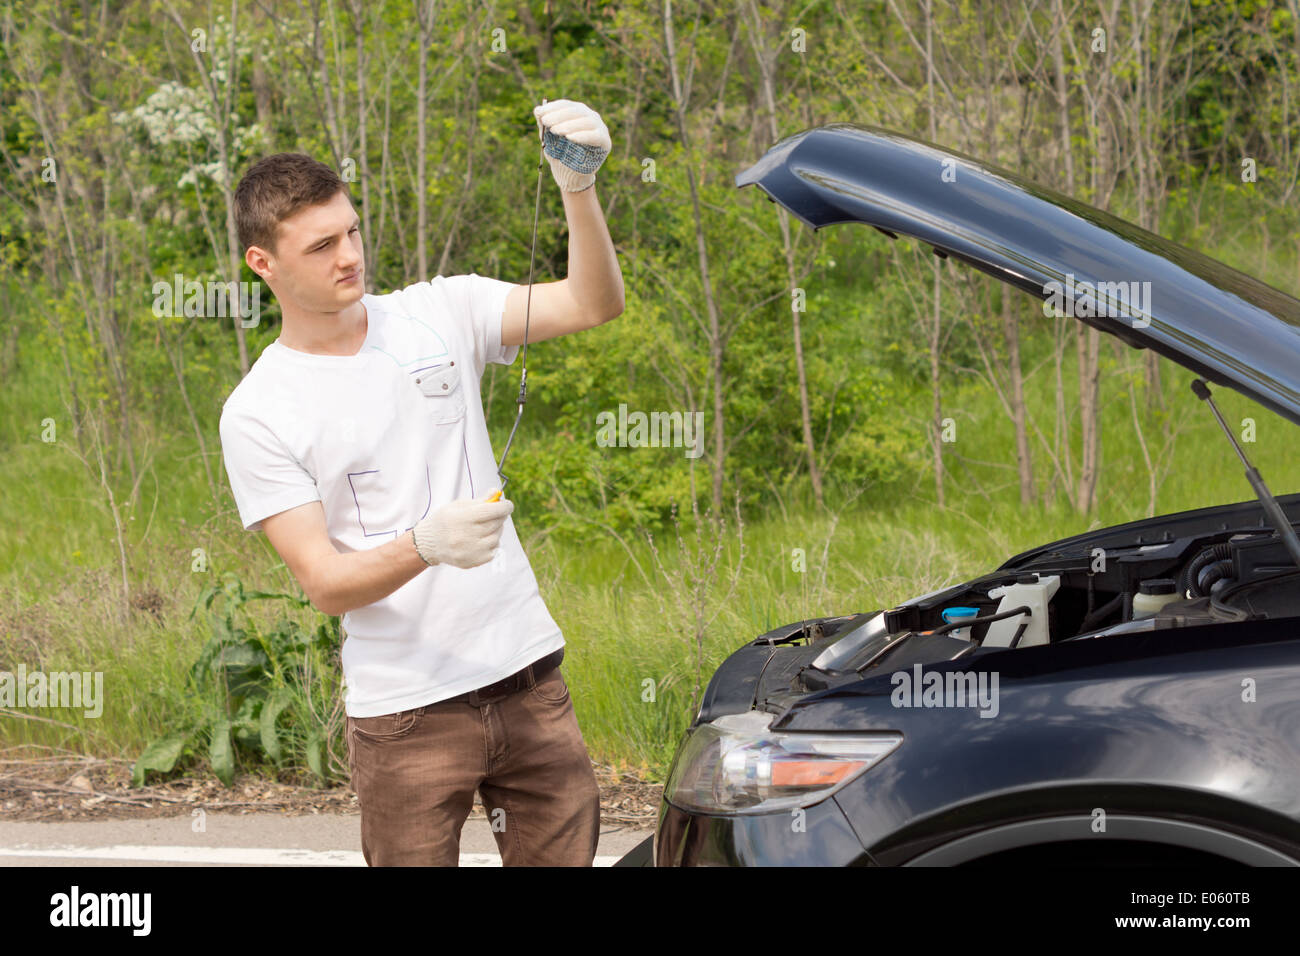 Mechanic checking the level of the oil on a car standing with the dipstick n his hand after the car broke down on a rural road Stock Photo